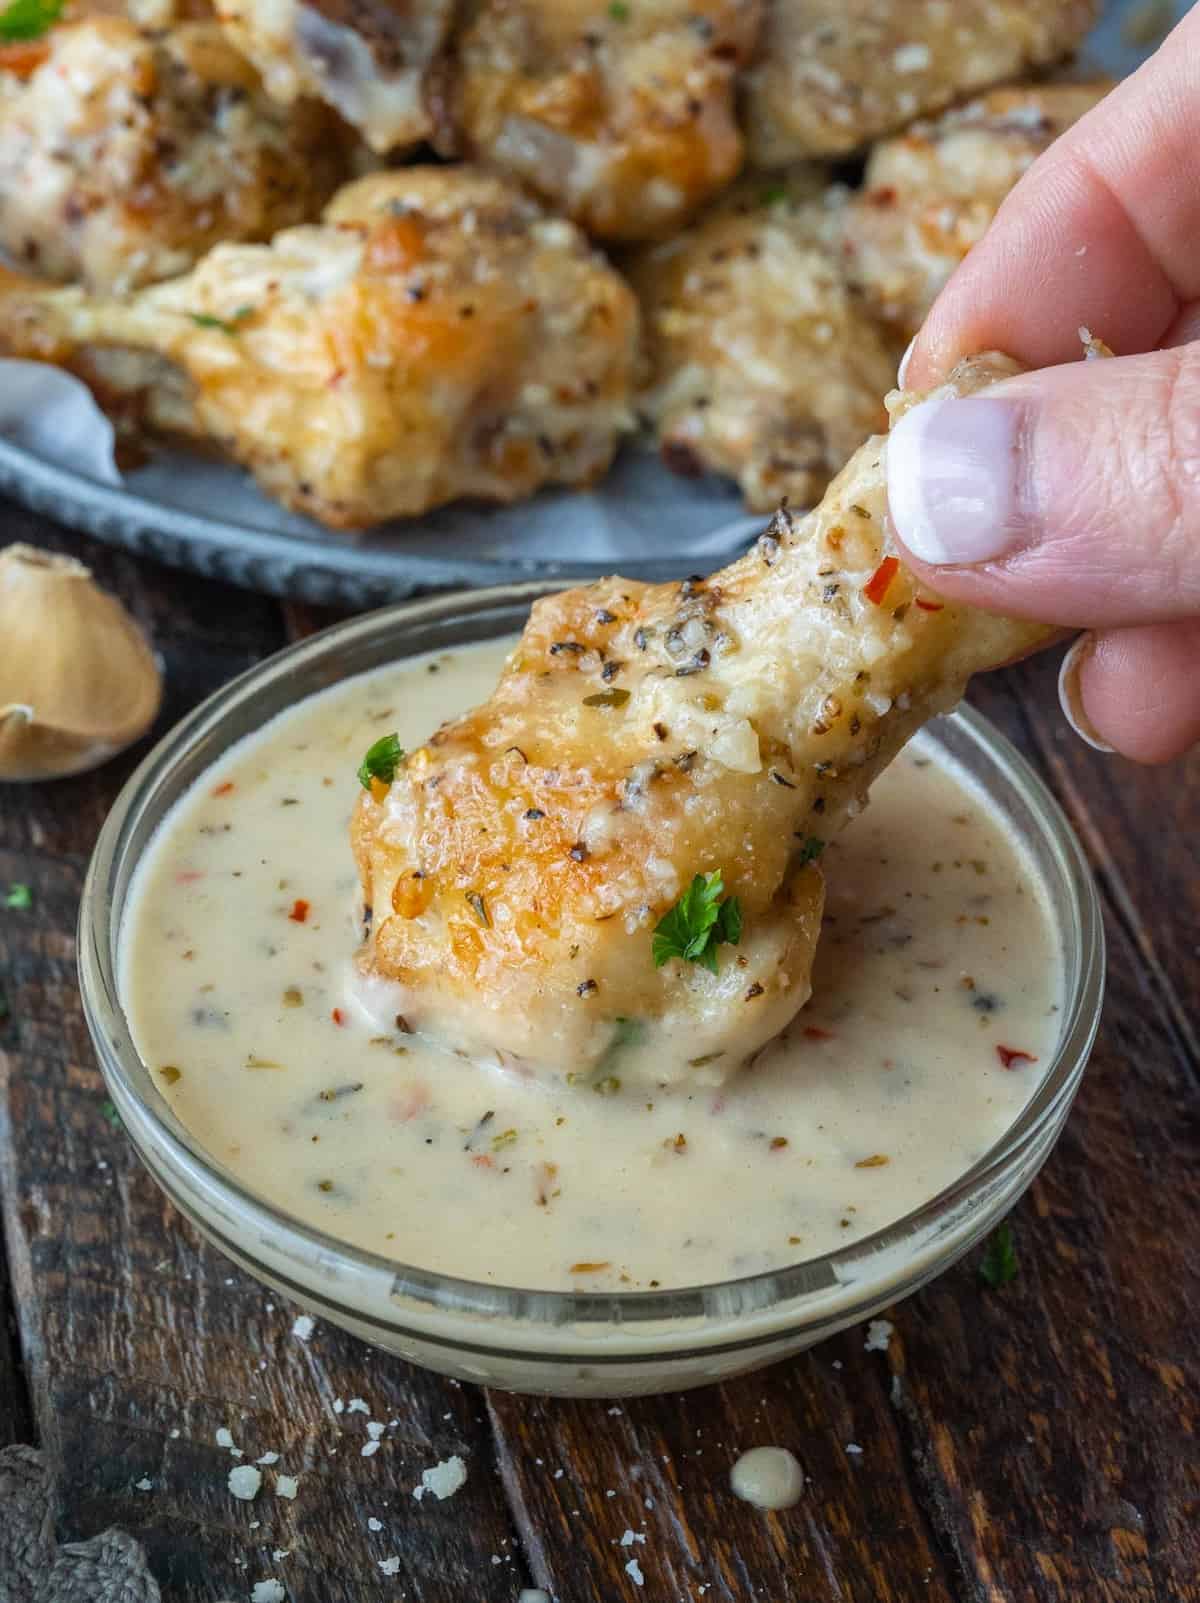 Dipping a chicken wing in garlic parmesan sauce.